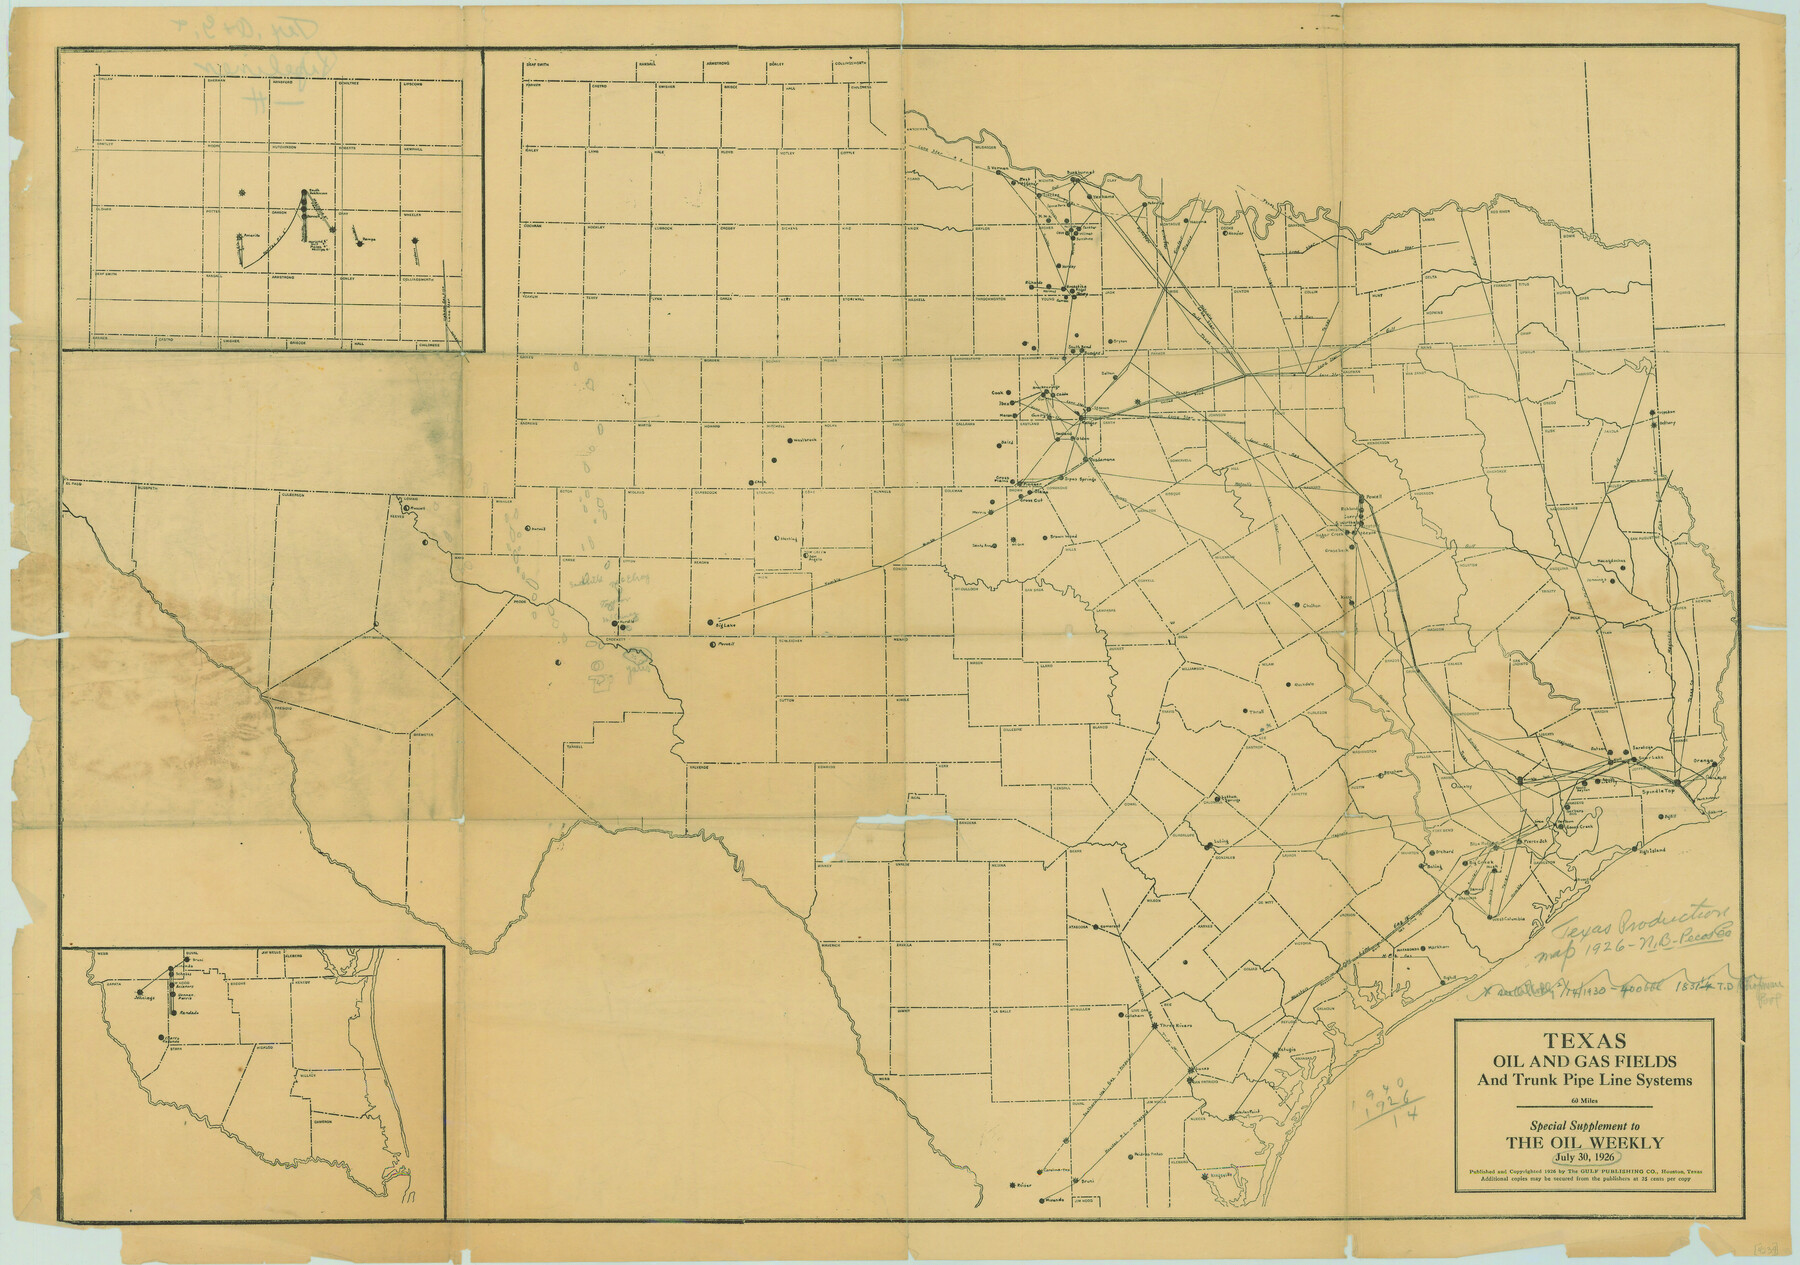 79327, Texas Oil and Gas Fields and Truck Pipe Line Systems, Texas State Library and Archives